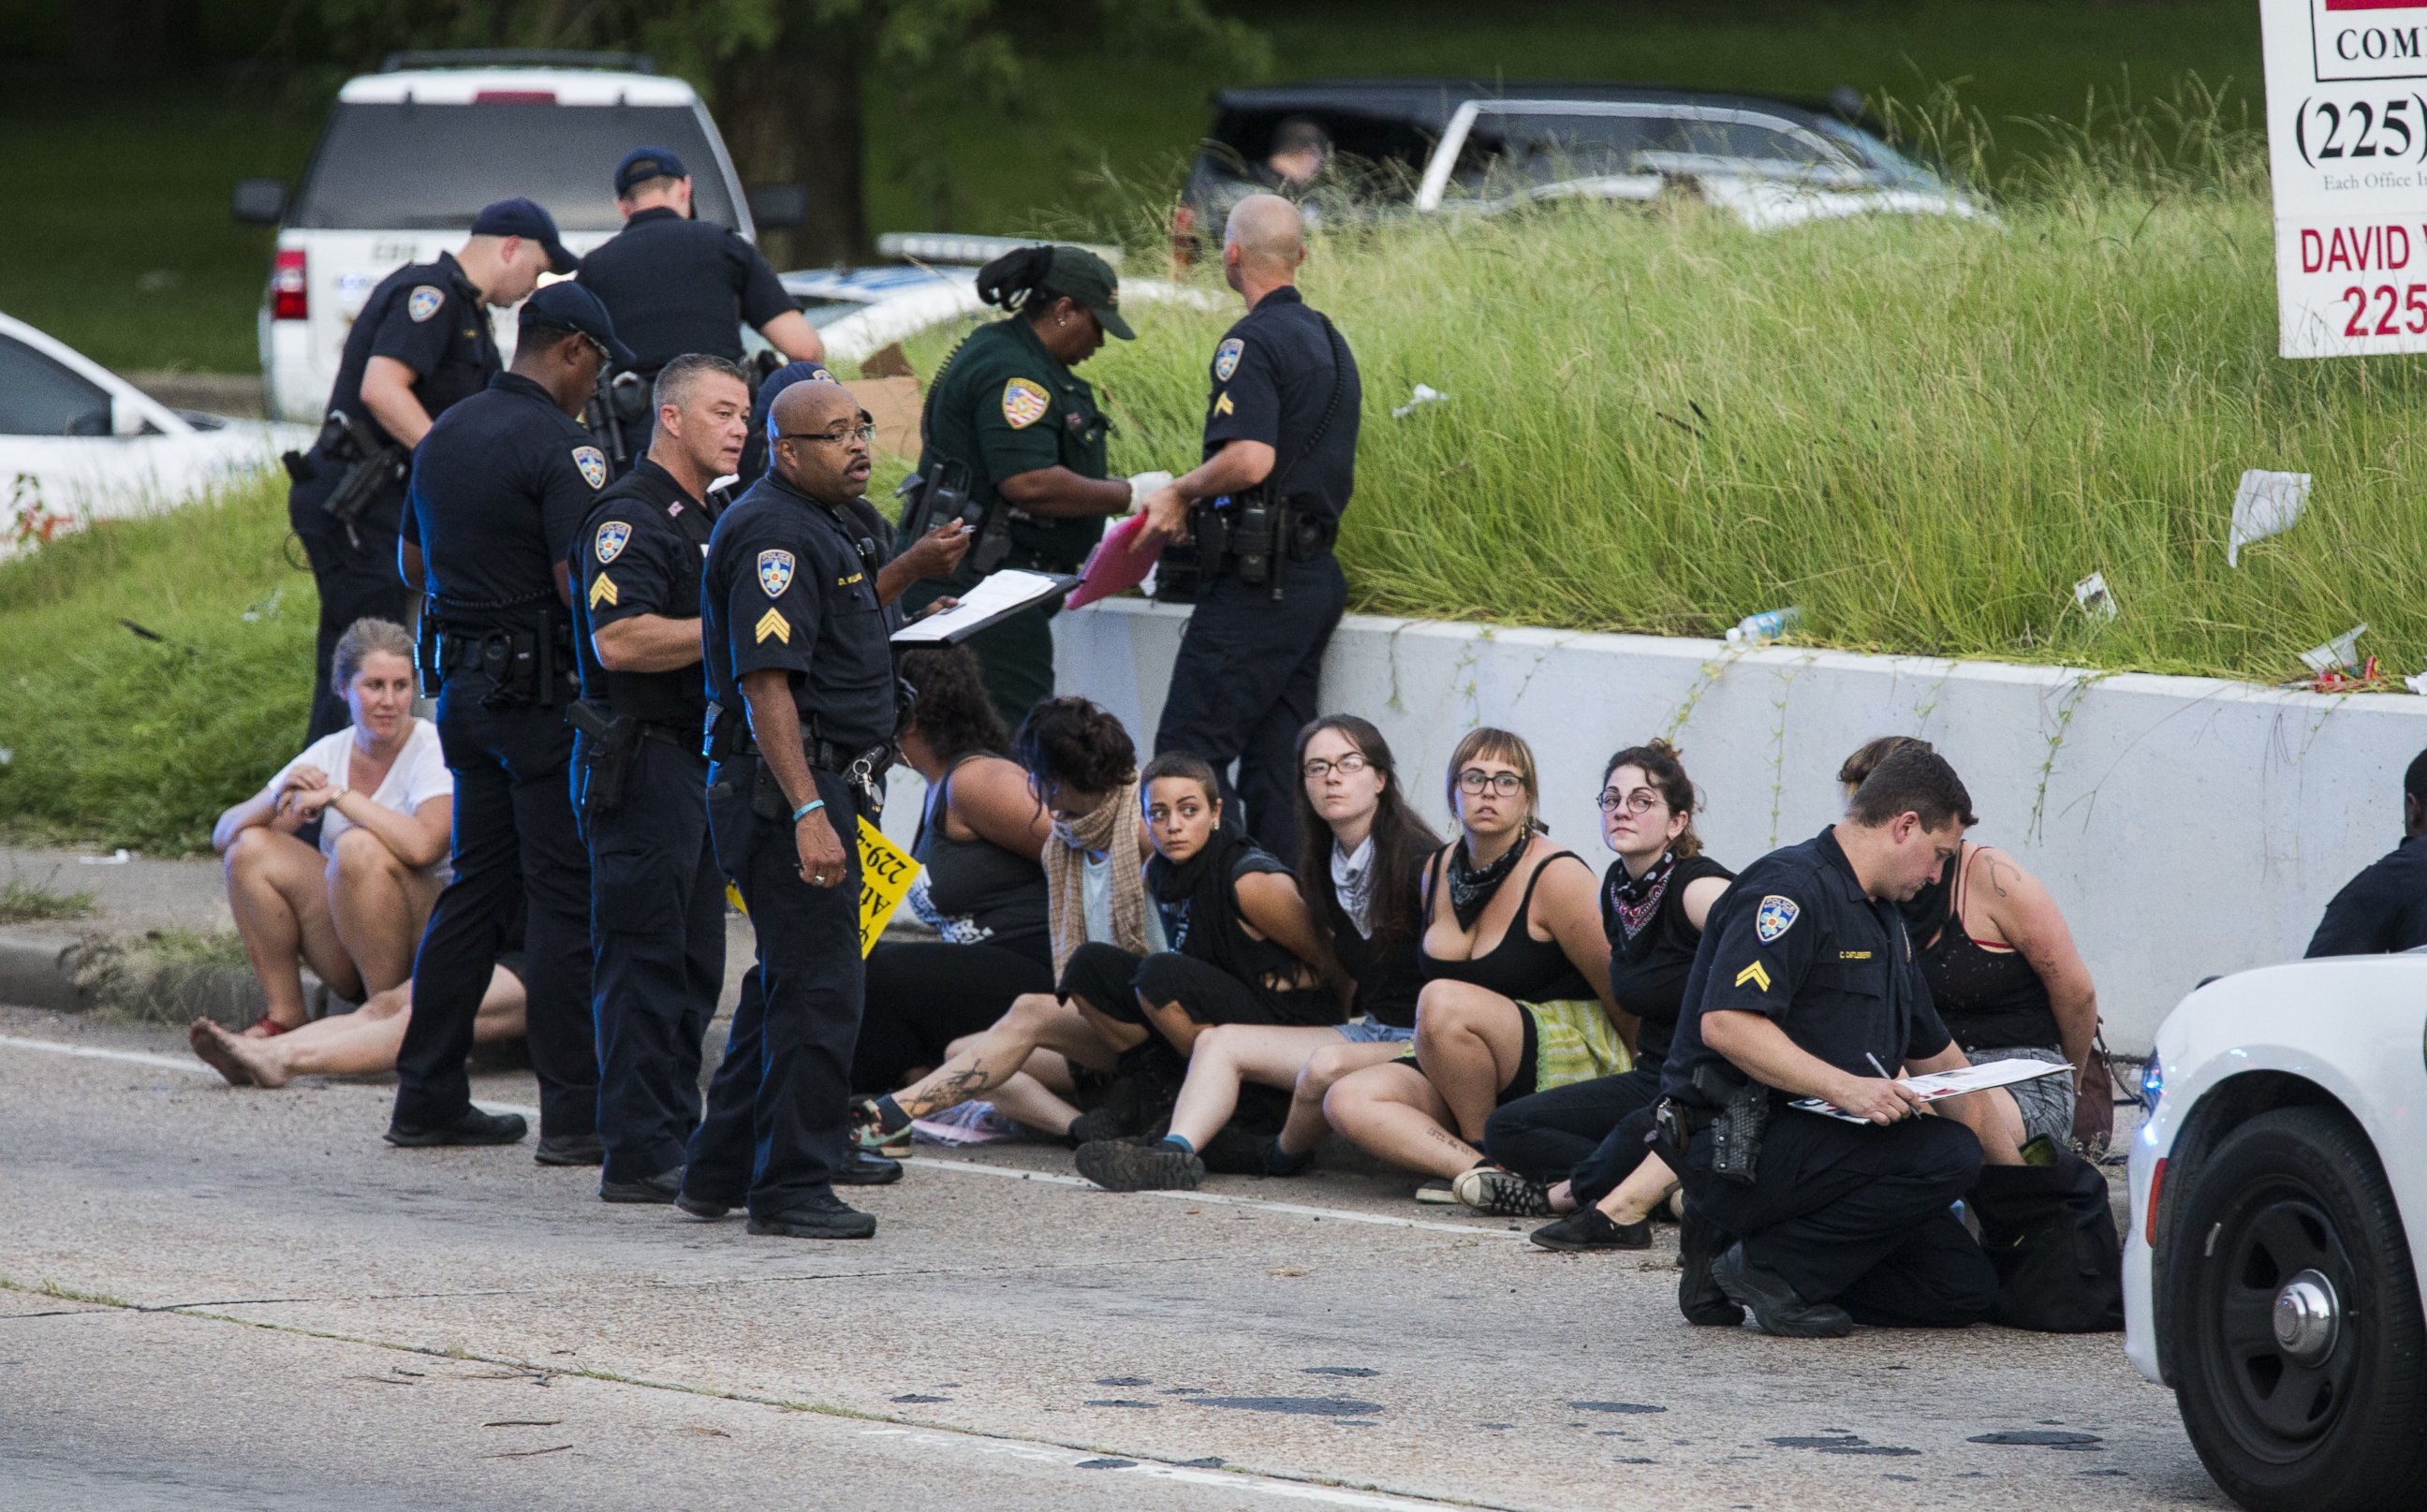 PHOTO: Several arrested protesters get processed on the scene after a march on July 10, 2016 in Baton Rouge, Louisiana. 